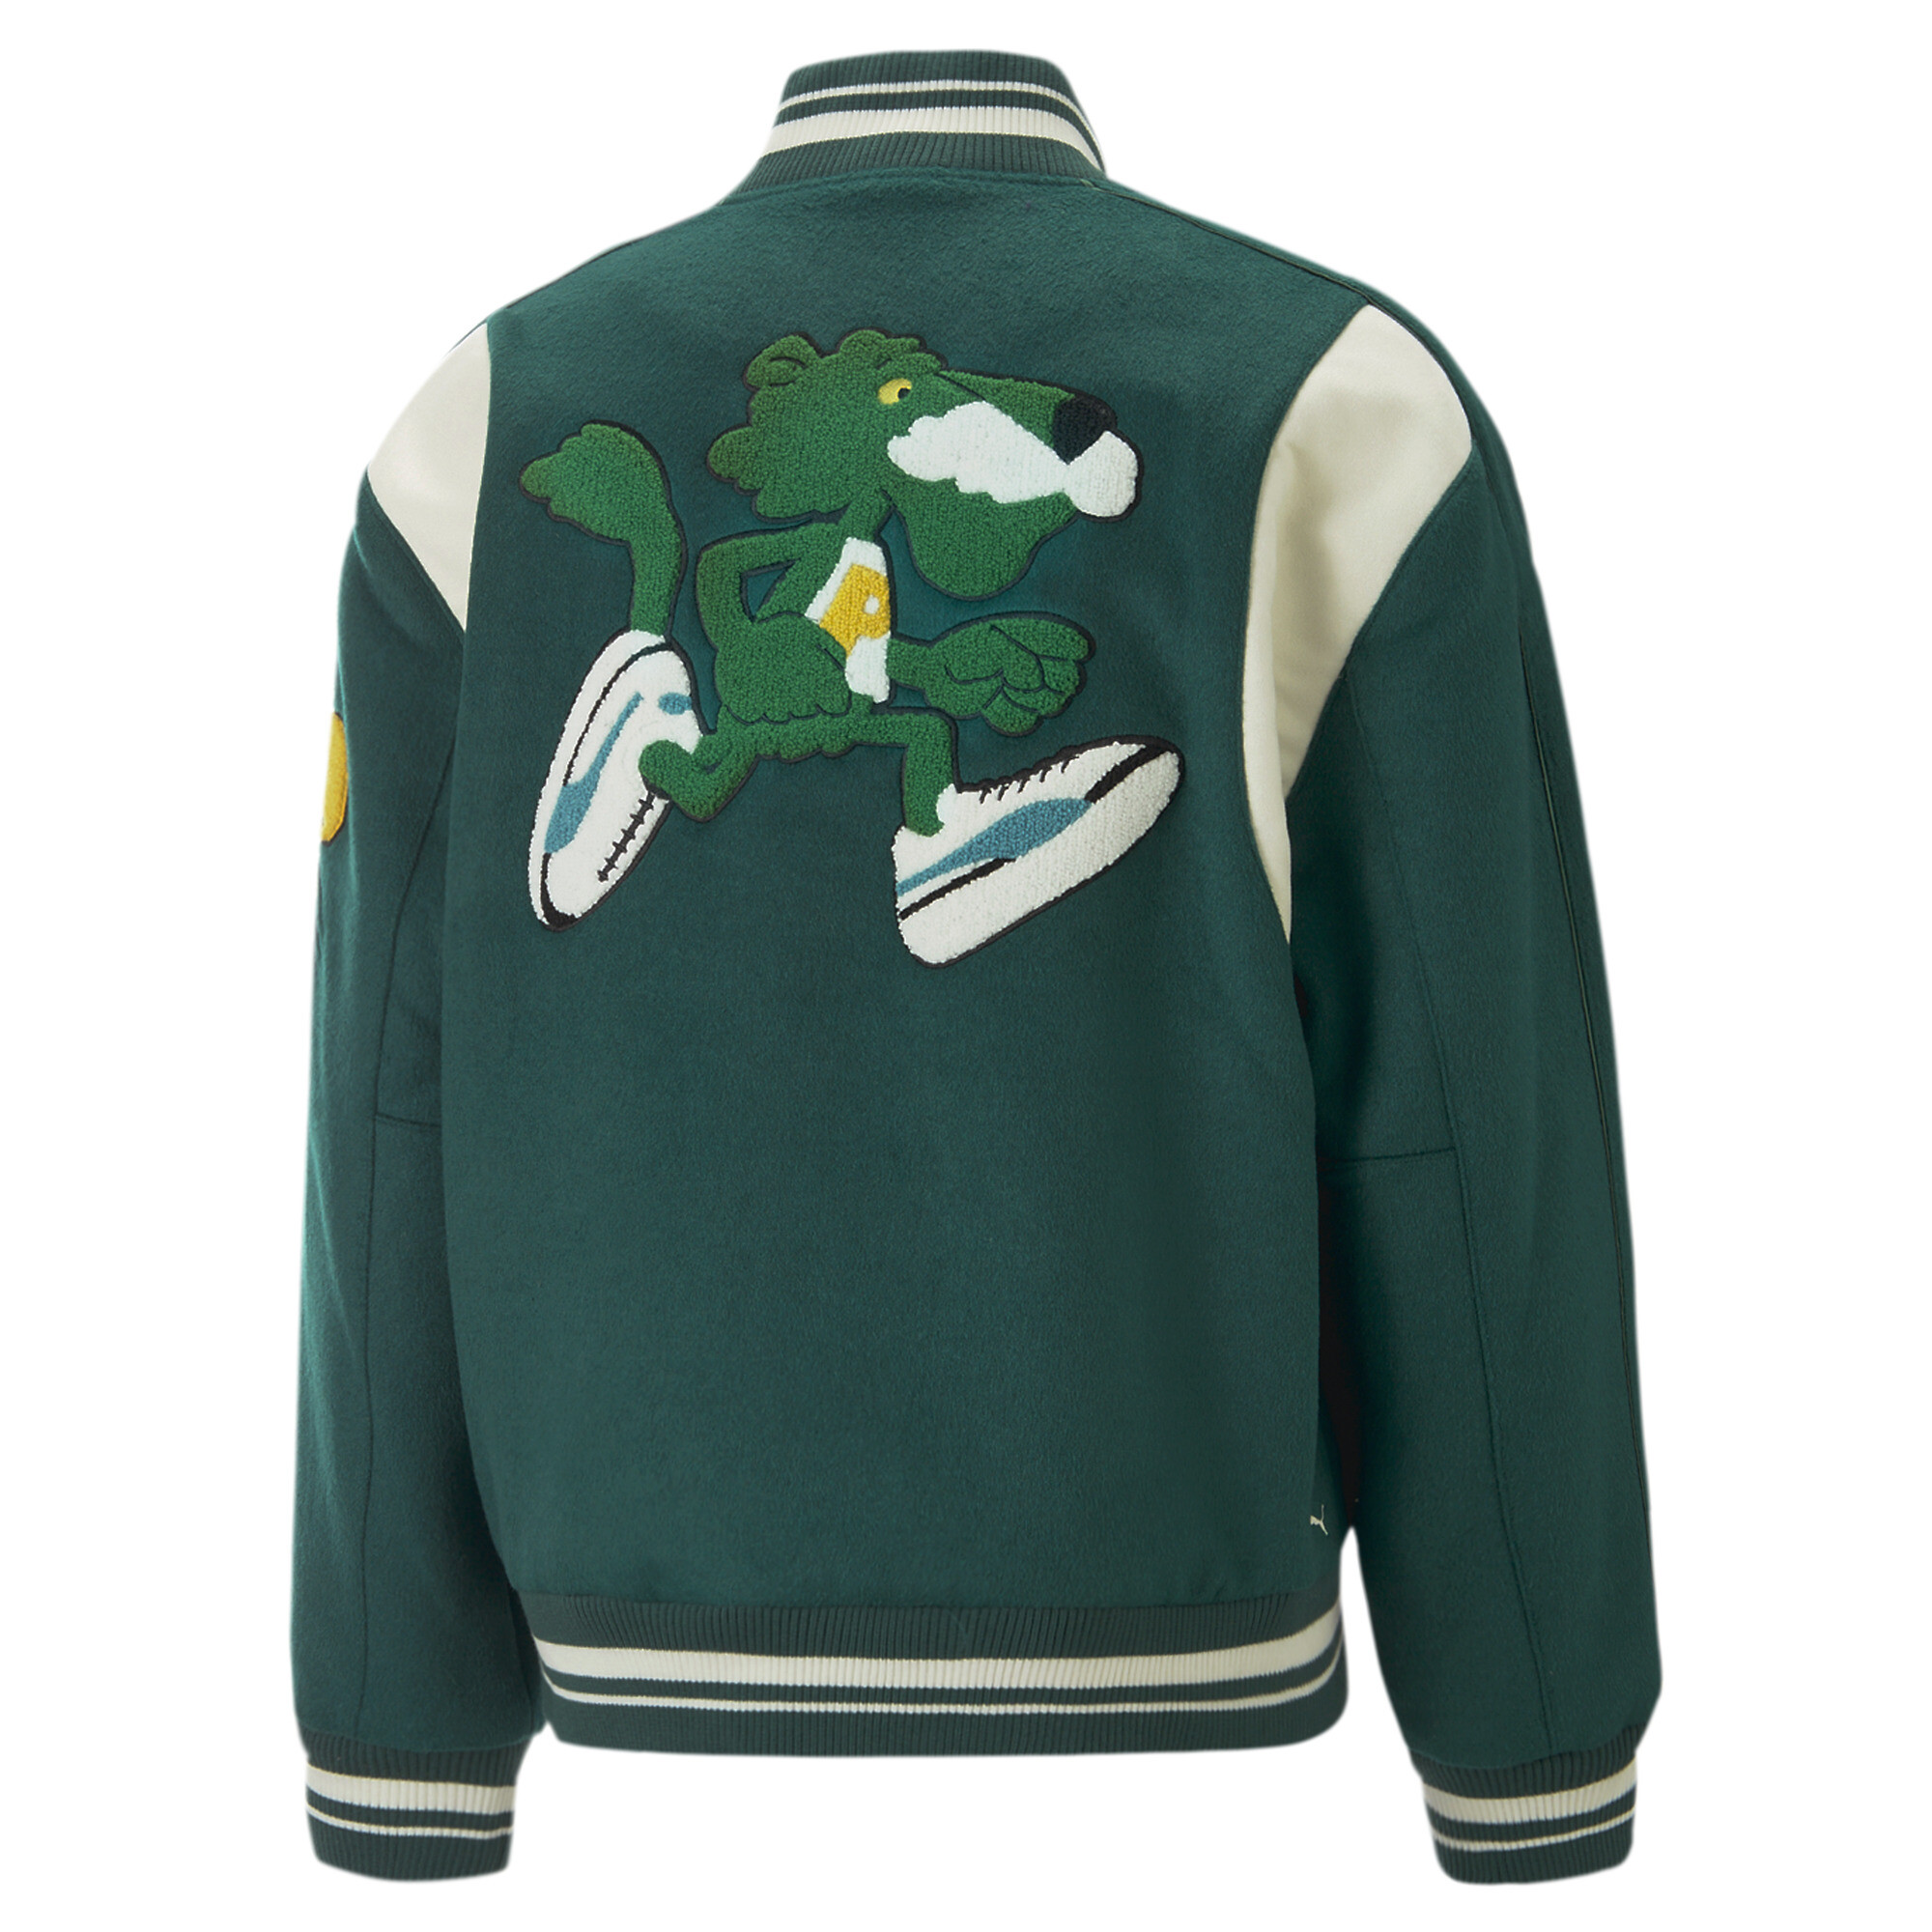 Men's PUMA The Mascot T7 College Jacket Men In Green, Size Large